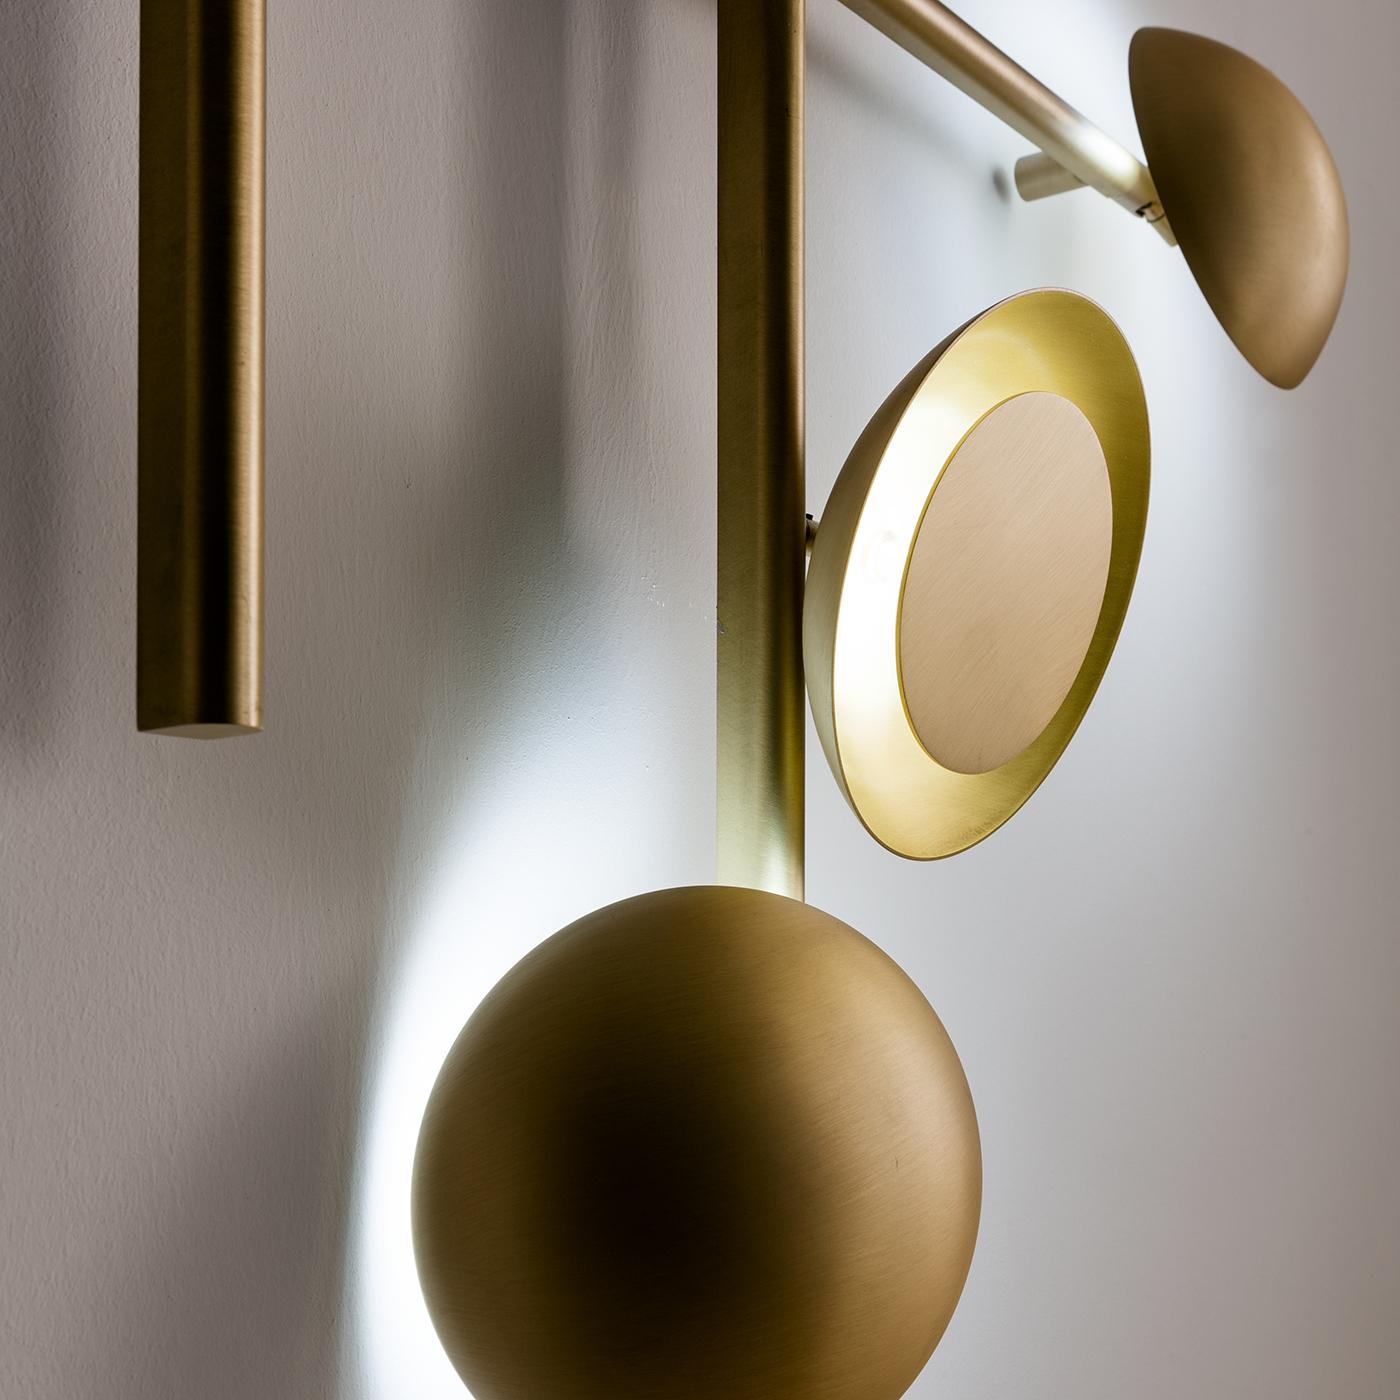 Illumination becomes an original sculpture of geometric forms with this stunning burnished brass wall lamp of the Gaia Collection by Cesare Arosio. Astonishing lighting effects are created by the different configurations of the singular disks